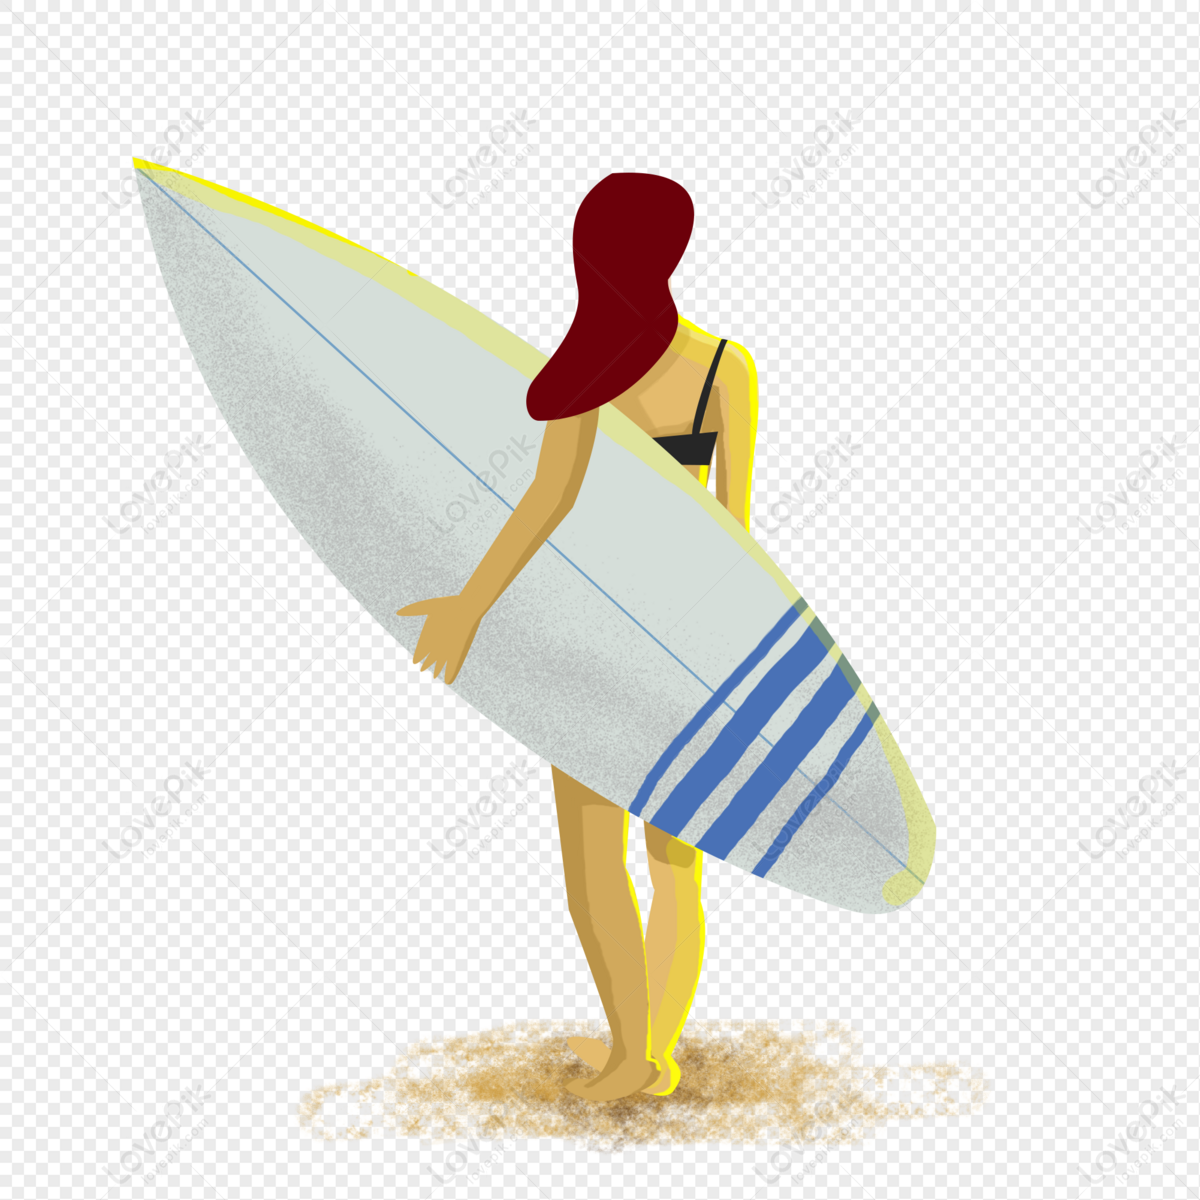 Tropical Surfing Summer Beach Graphic, Surf, Surfer, Surfing PNG  Transparent Image and Clipart for Free Download